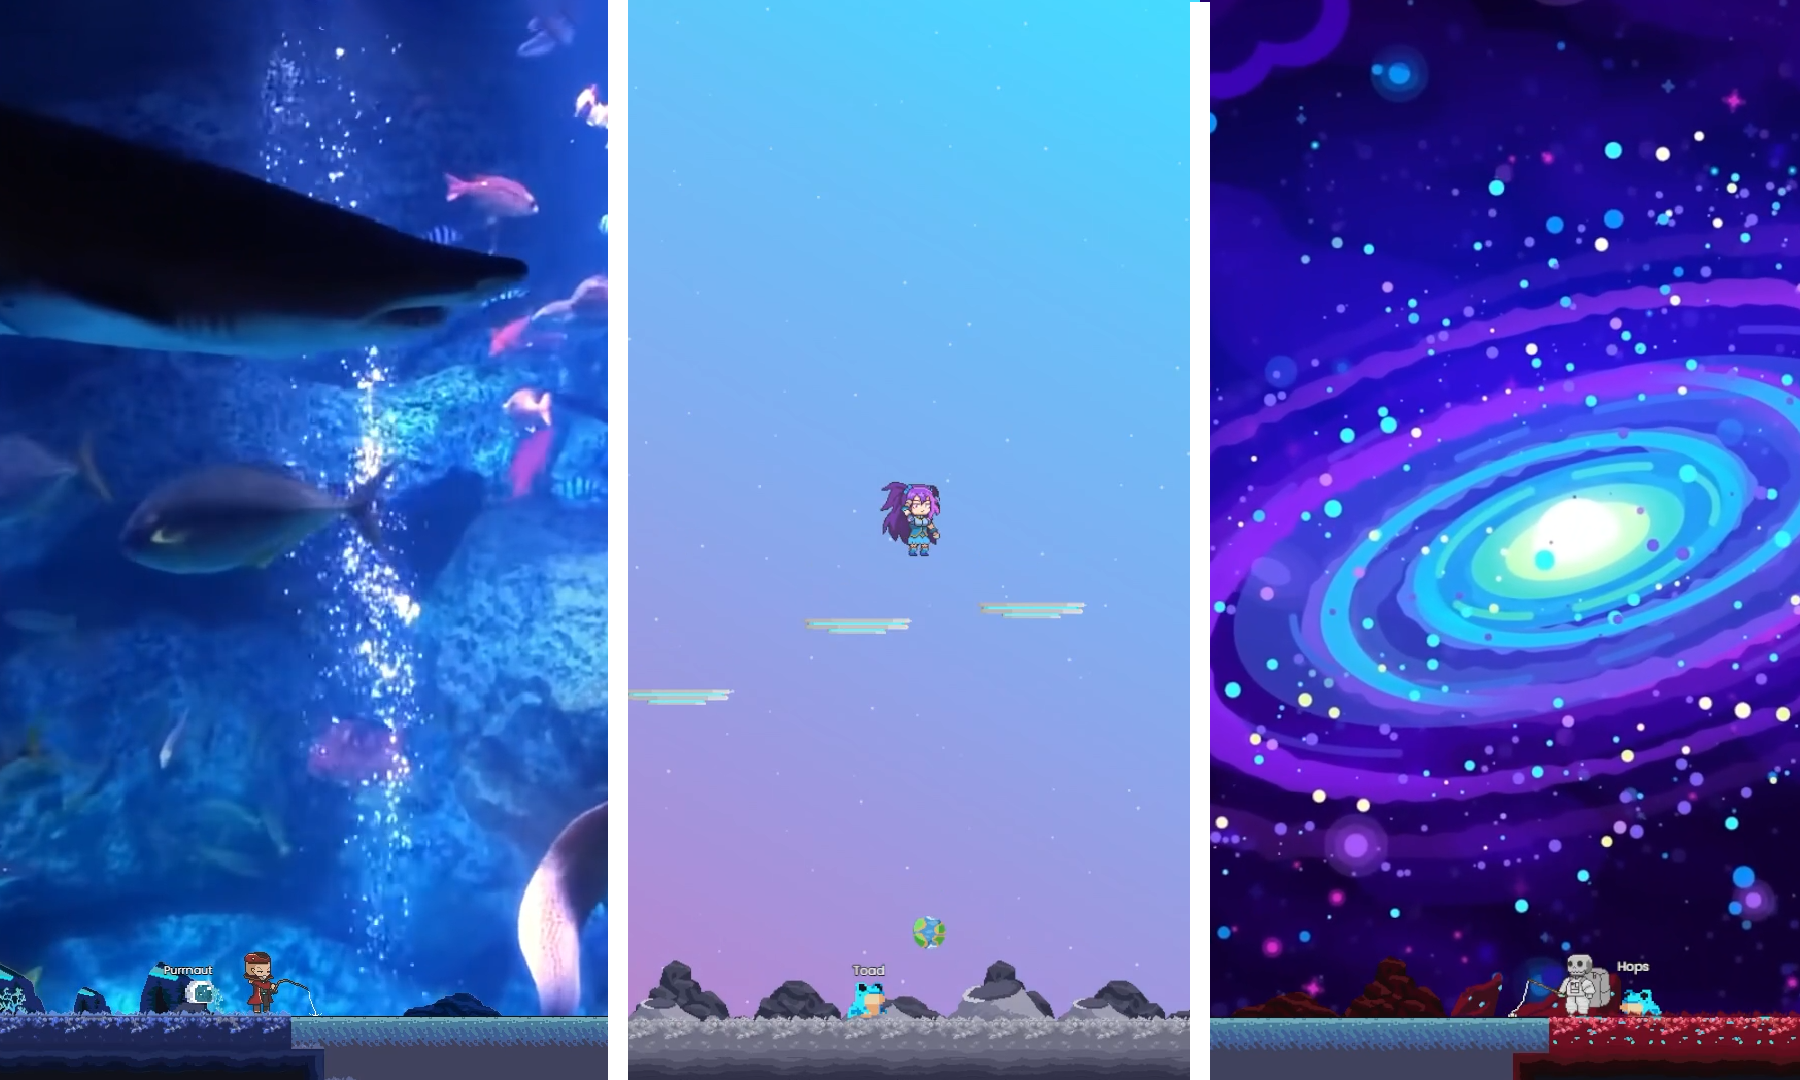 An image split into three sections of Local Universe gameplay. On the left side a user if fishing with a underwater YouTube video in the background. In the middle a user is jumping through the parkour course on a moon planet, On the right a user is fishing on a red planet with a video of a galaxy in the background